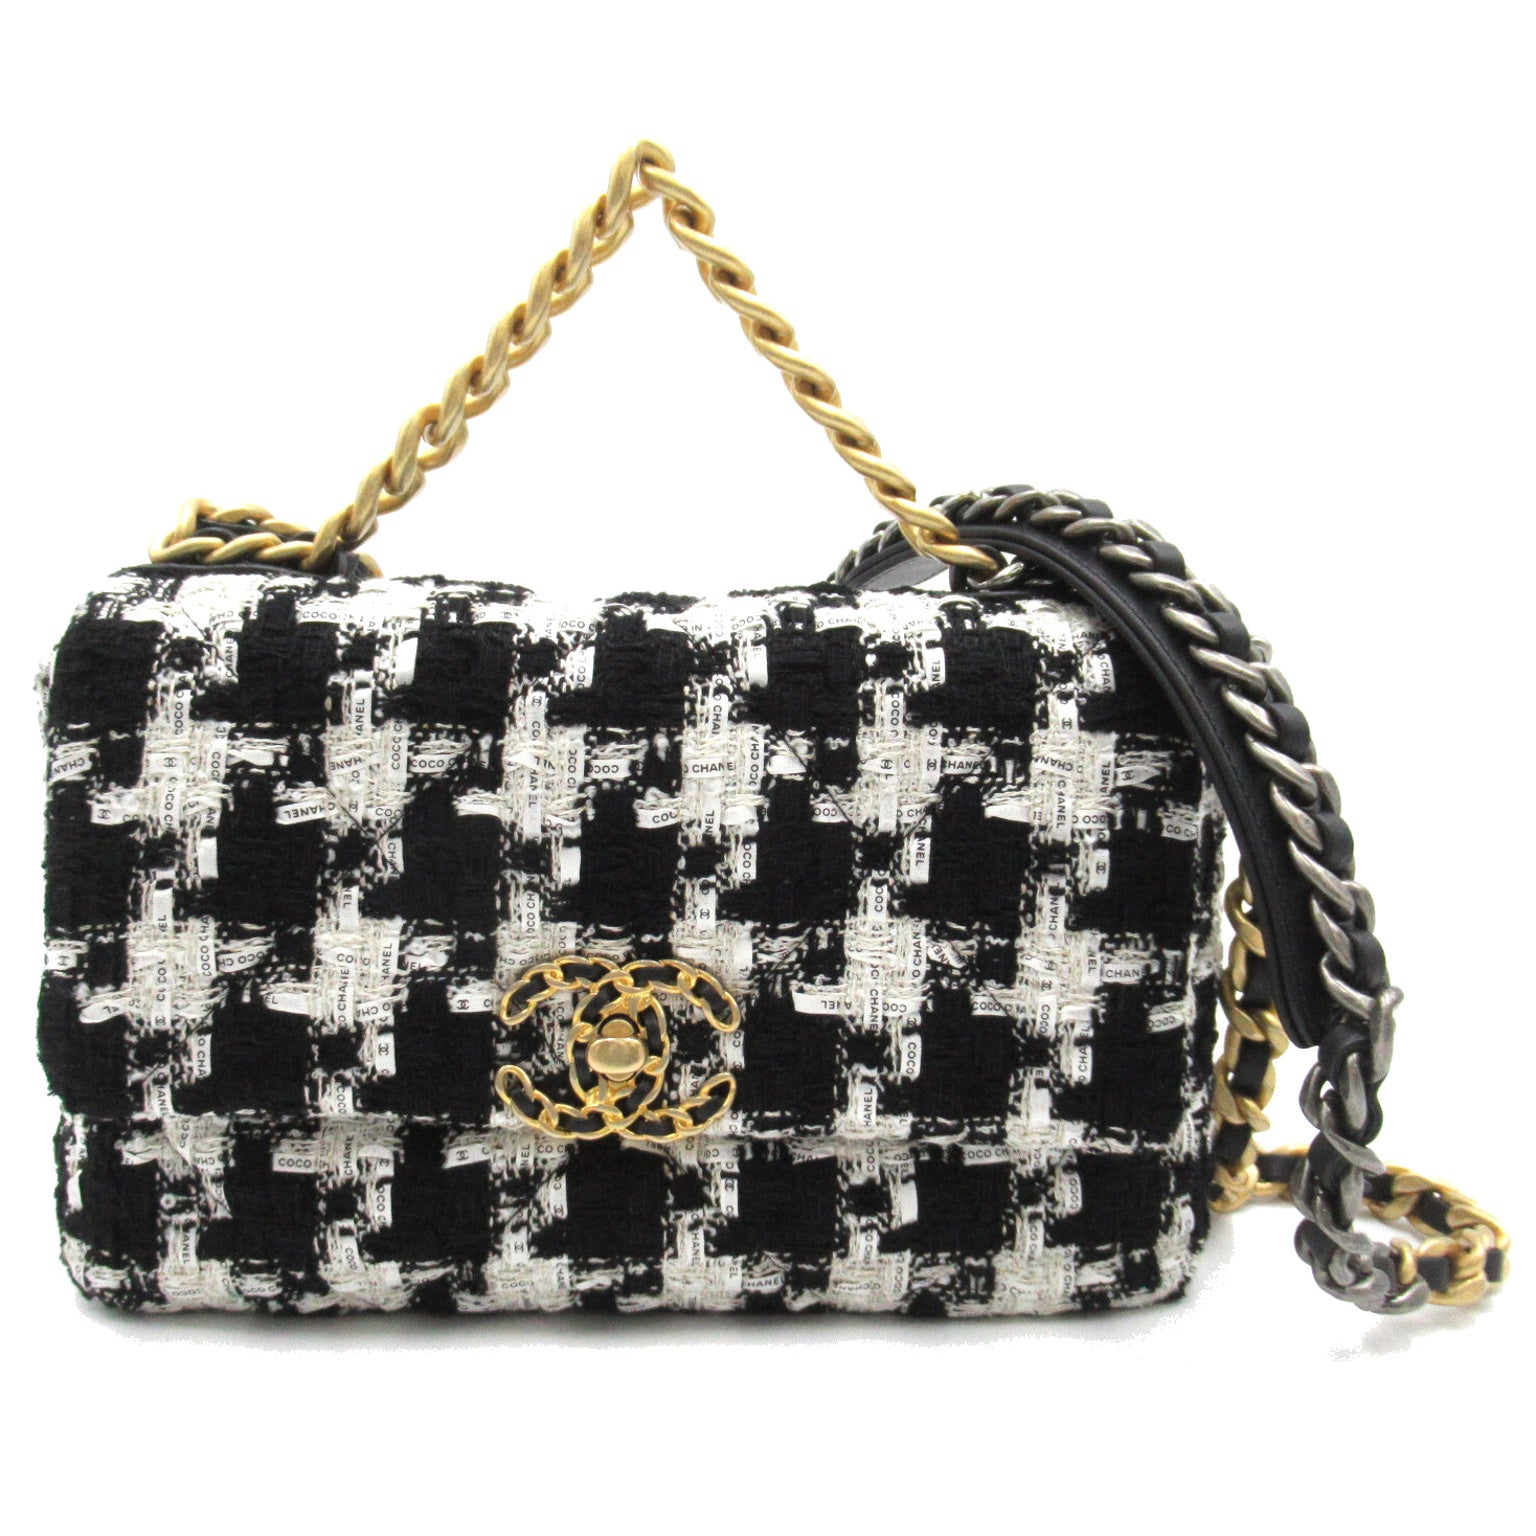 CHANEL CHANEL 19 Chain Shoulder Bag Tweed/Wall/Leather  Black/White AS1160